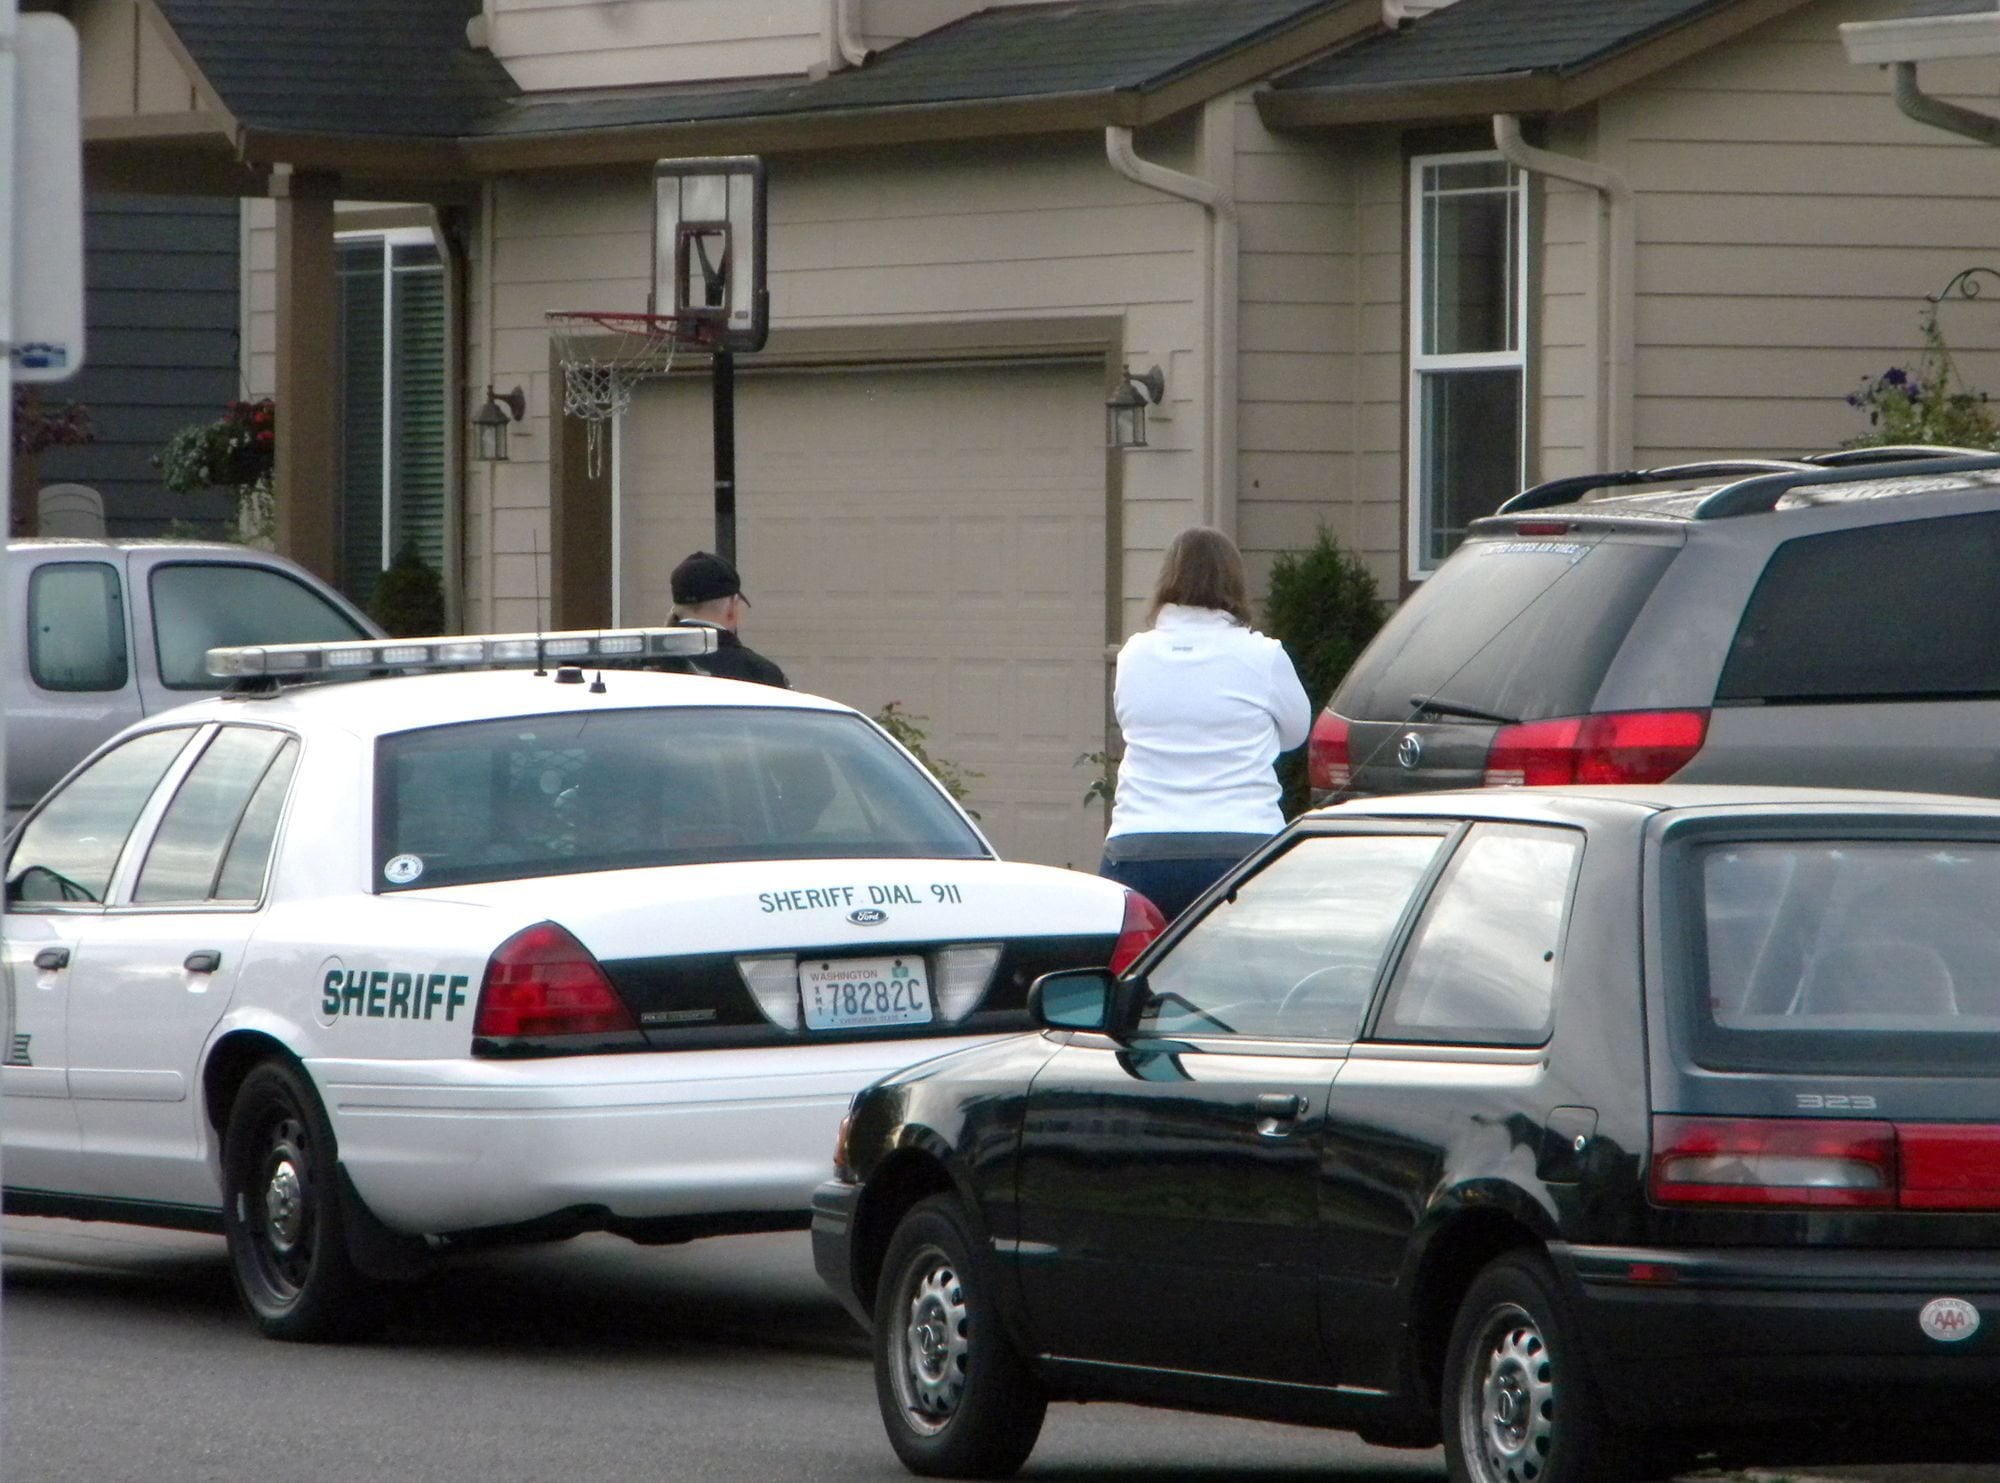 Police are pictured here responding to the Battle Ground home of Clark County sheriff's Detective Ed Owens on Sept. 15, 2010, a day after an accidental shooting there. Owens' 3-year-old son, Ryan, got ahold of his father's gun, accidentally shooting himself.